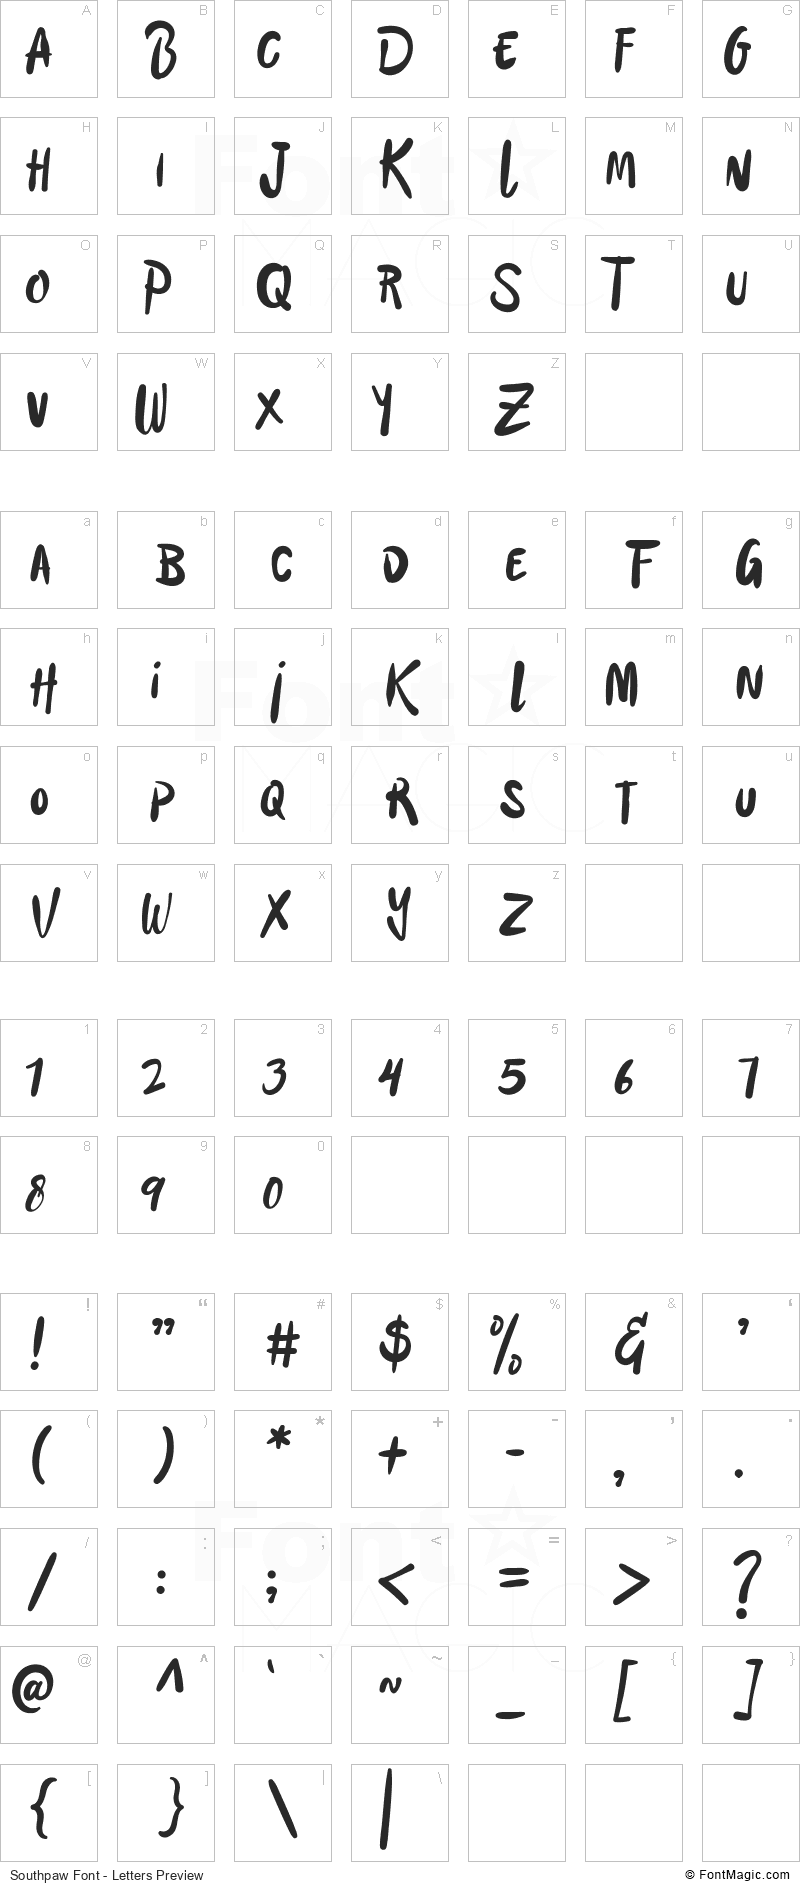 Southpaw Font - All Latters Preview Chart